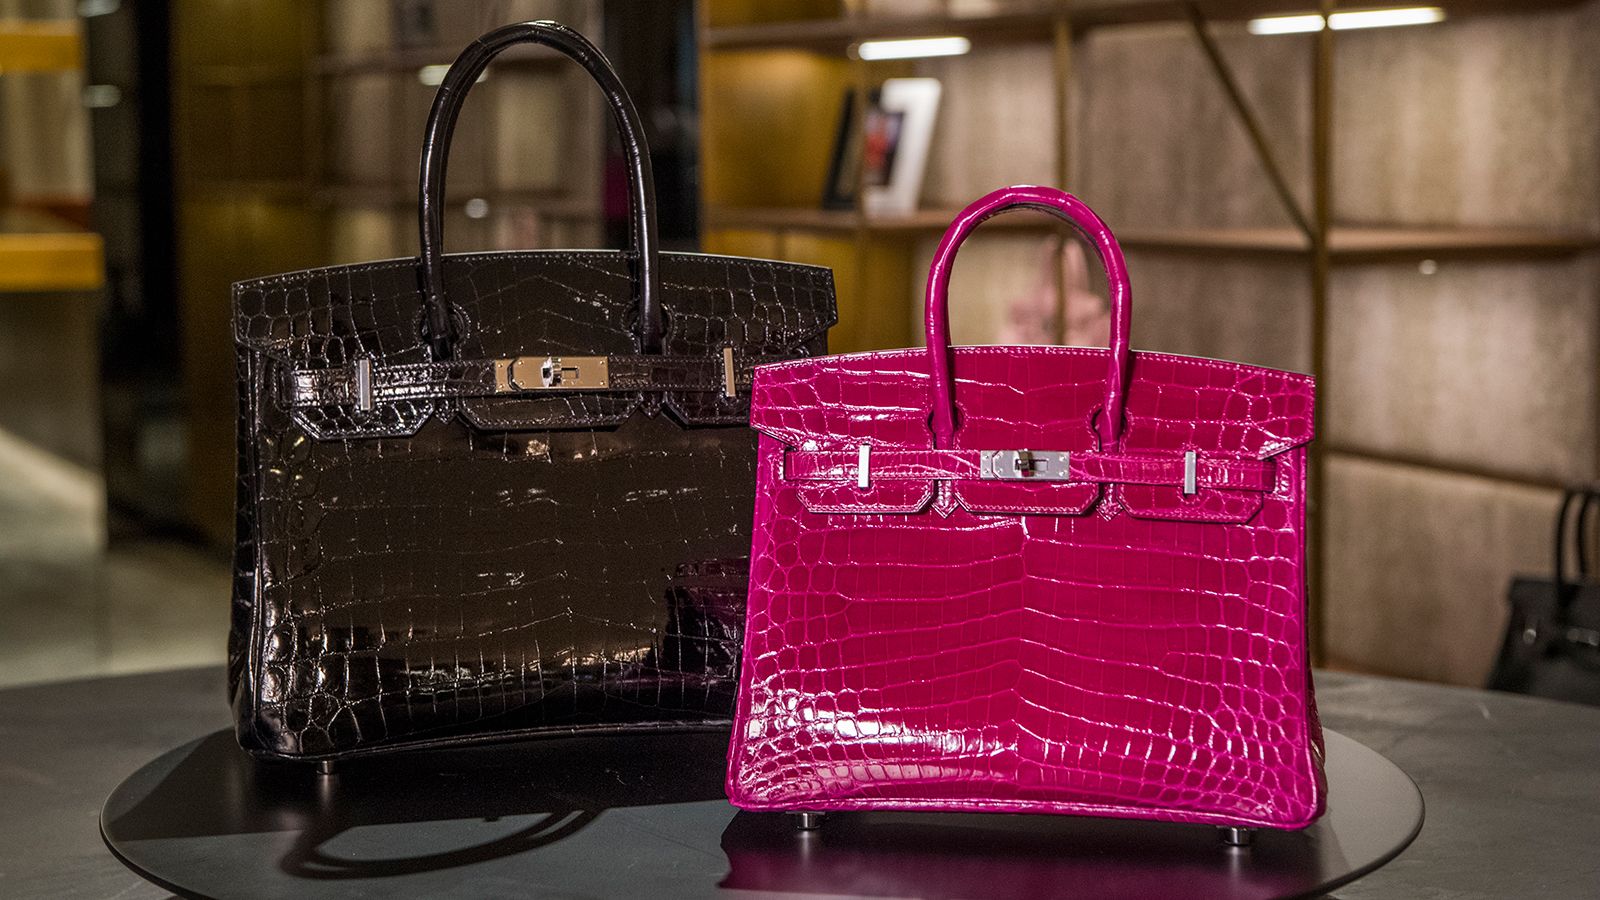 Most Expensive Hermes Birkin Bag Is Heading to the Auction Block